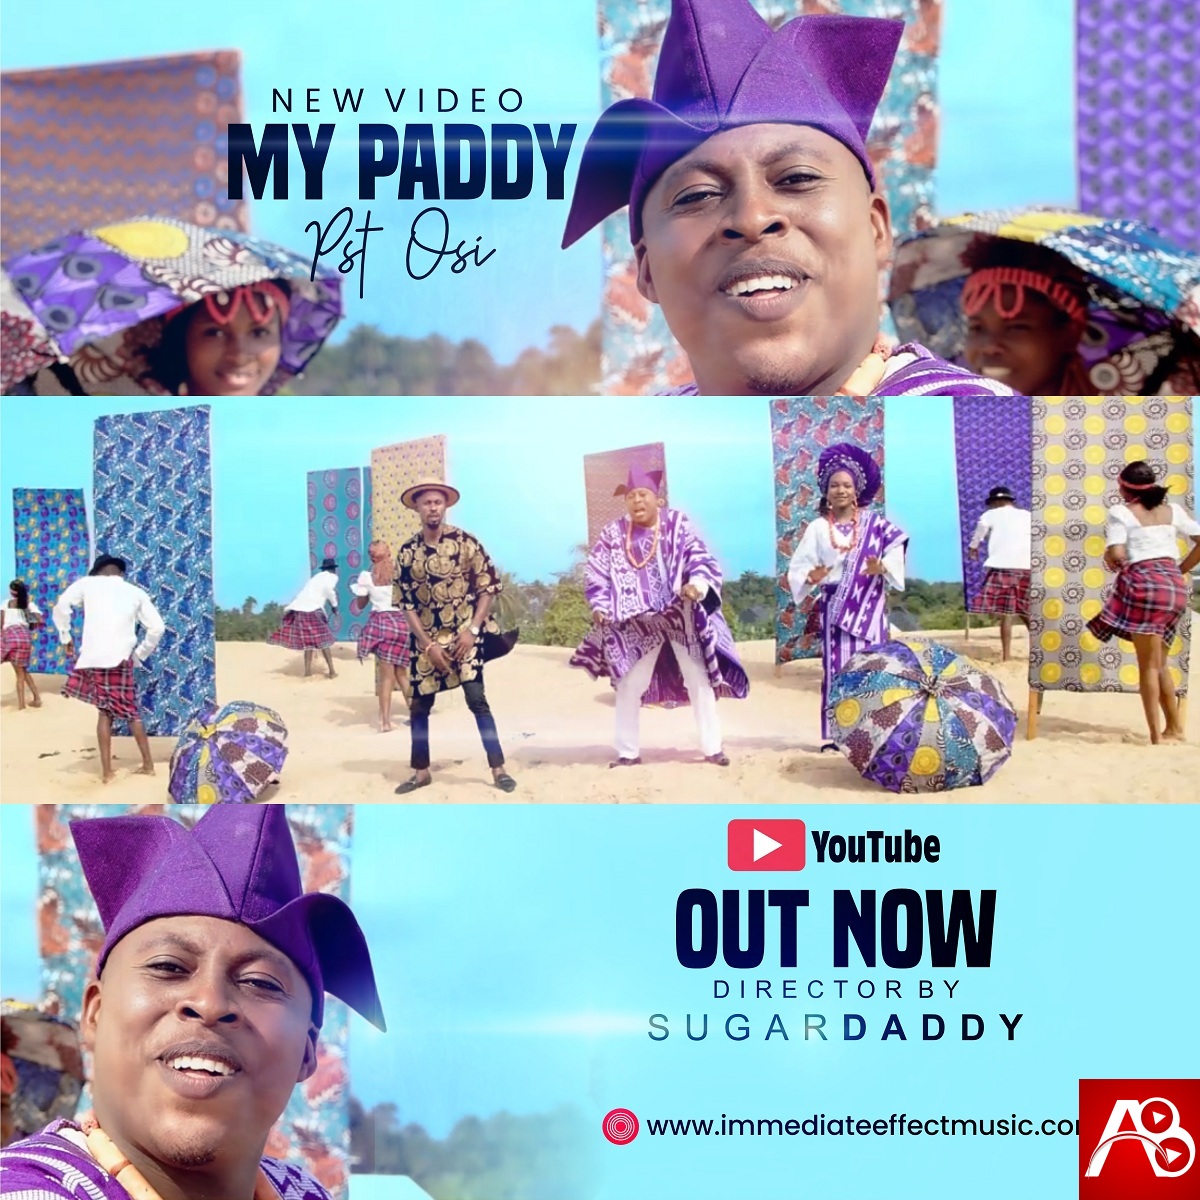 My Paddy" By Pastor Ozi featuring Joeblings